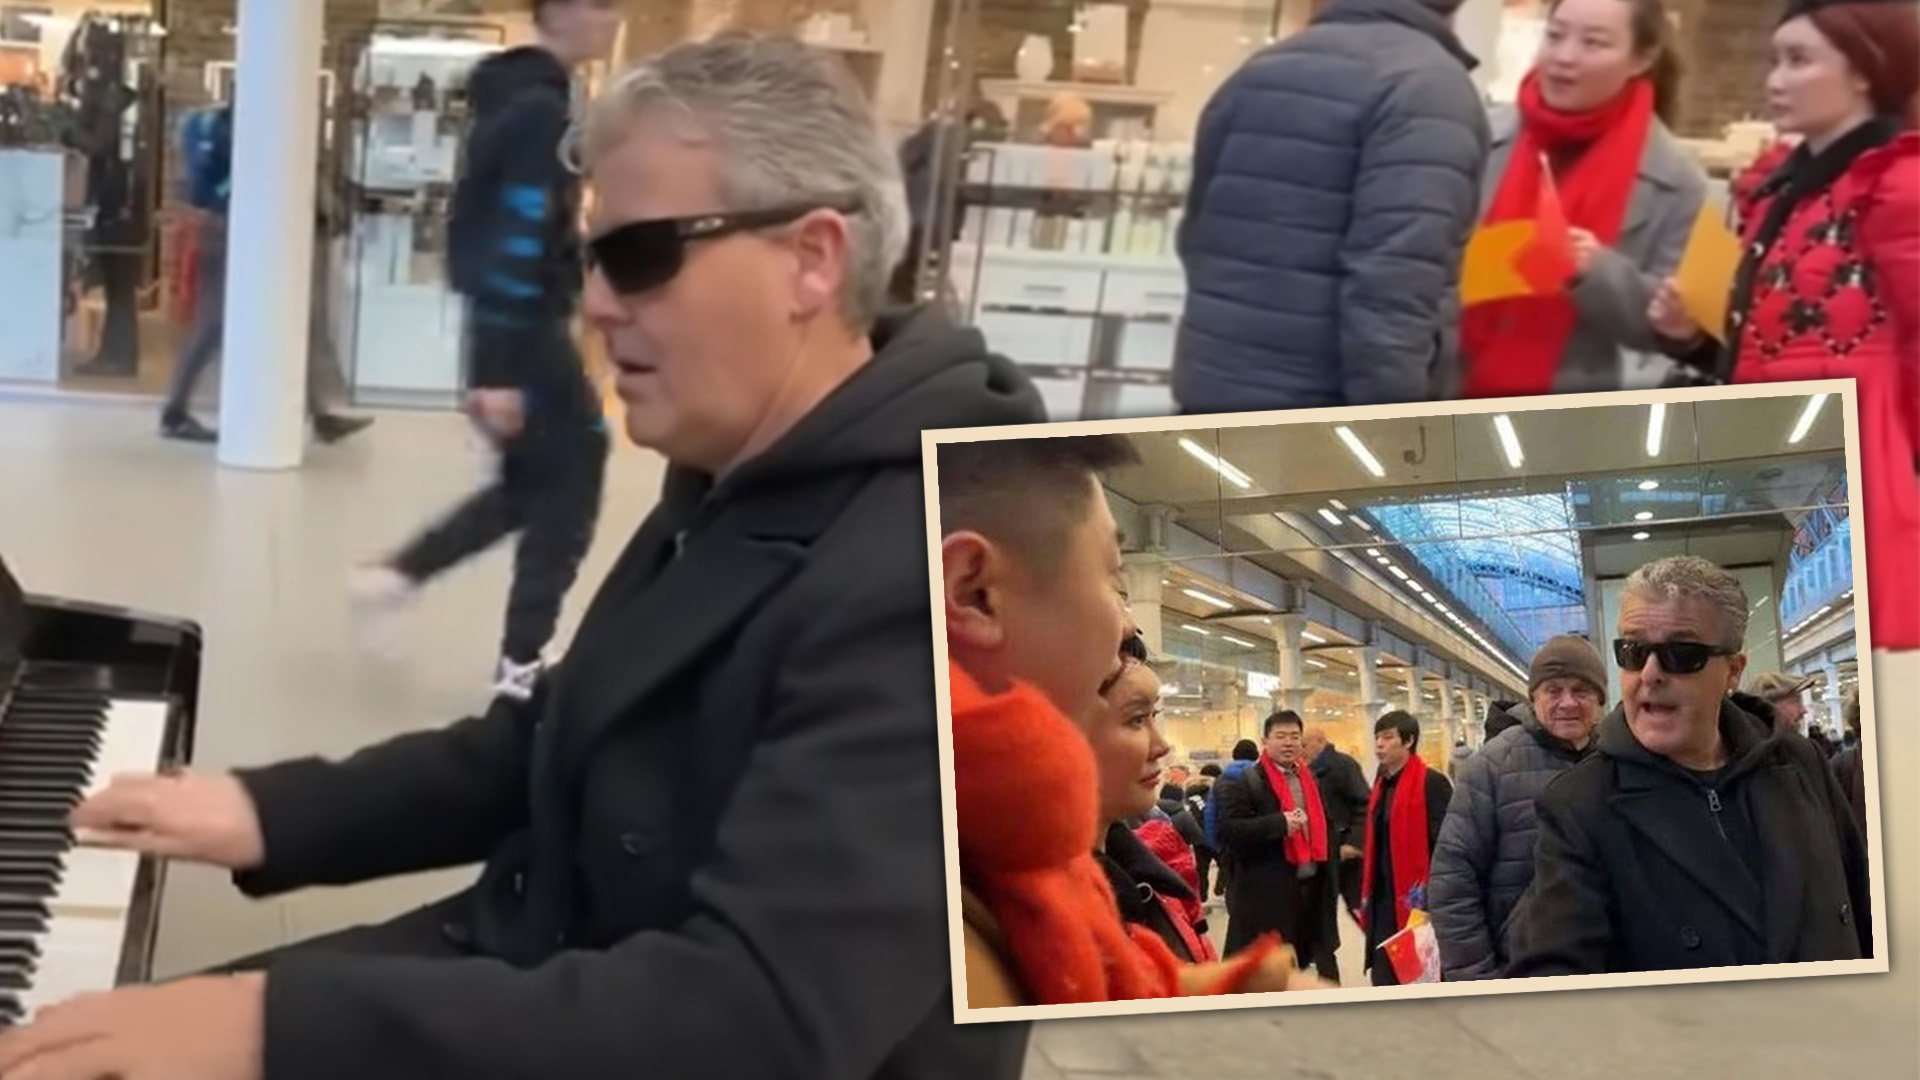 A British piano player who became an on and offline sensation over an altercation he had with a group of people from China inside a busy London railway station is facing a backlash on mainland social media. Photo: YouTube/desertrosevideos